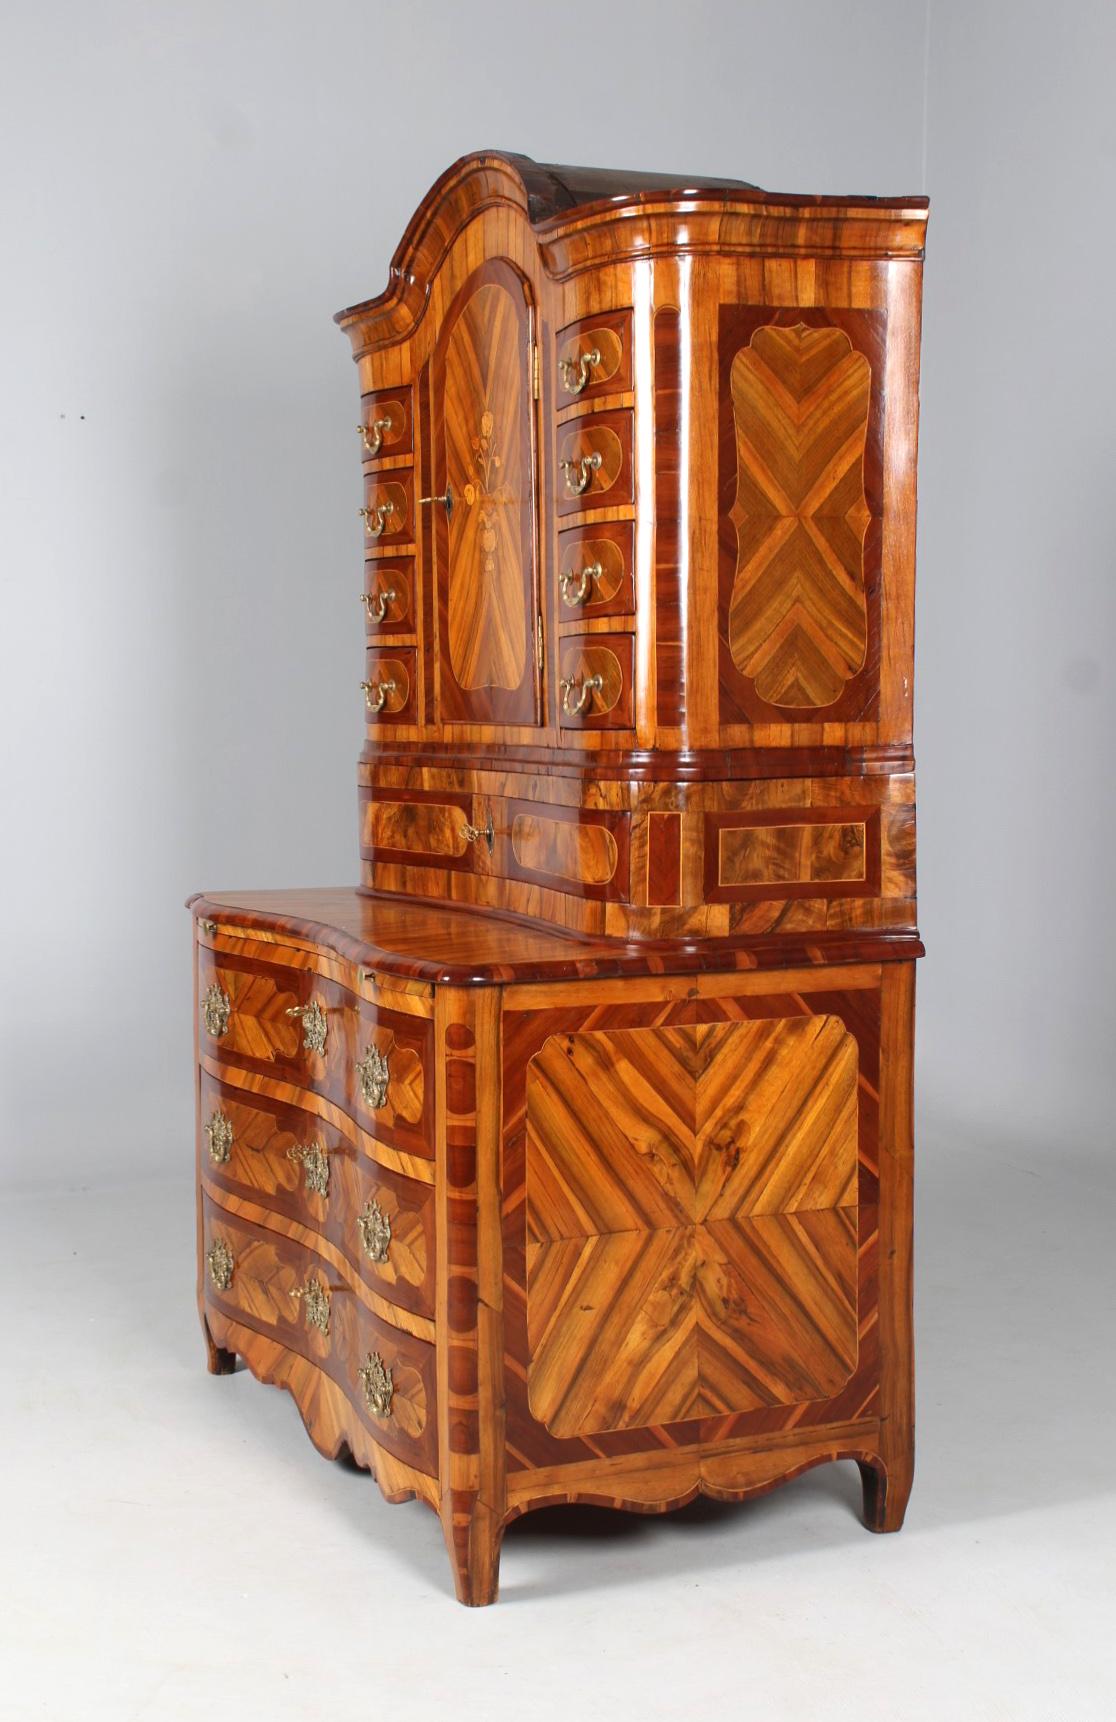 Antique sideboard, buffet, chest of drawers with attachment

South Germany
walnut, plum etc.
Classicism around 1770

Dimensions: H x W x D: 192 x 125 x 71 cm

Description:
Three-piece piece of furniture from the Transition period, i.e. the